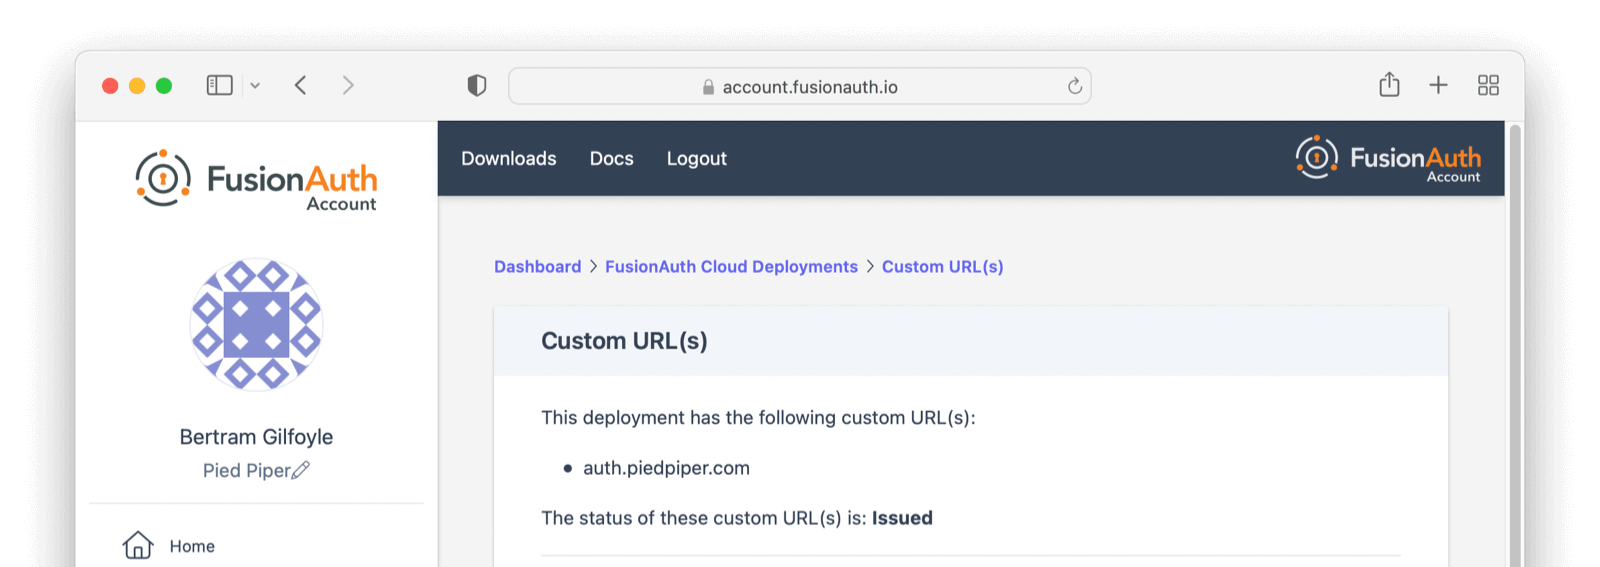 Pending verification custom url is in a pending state.